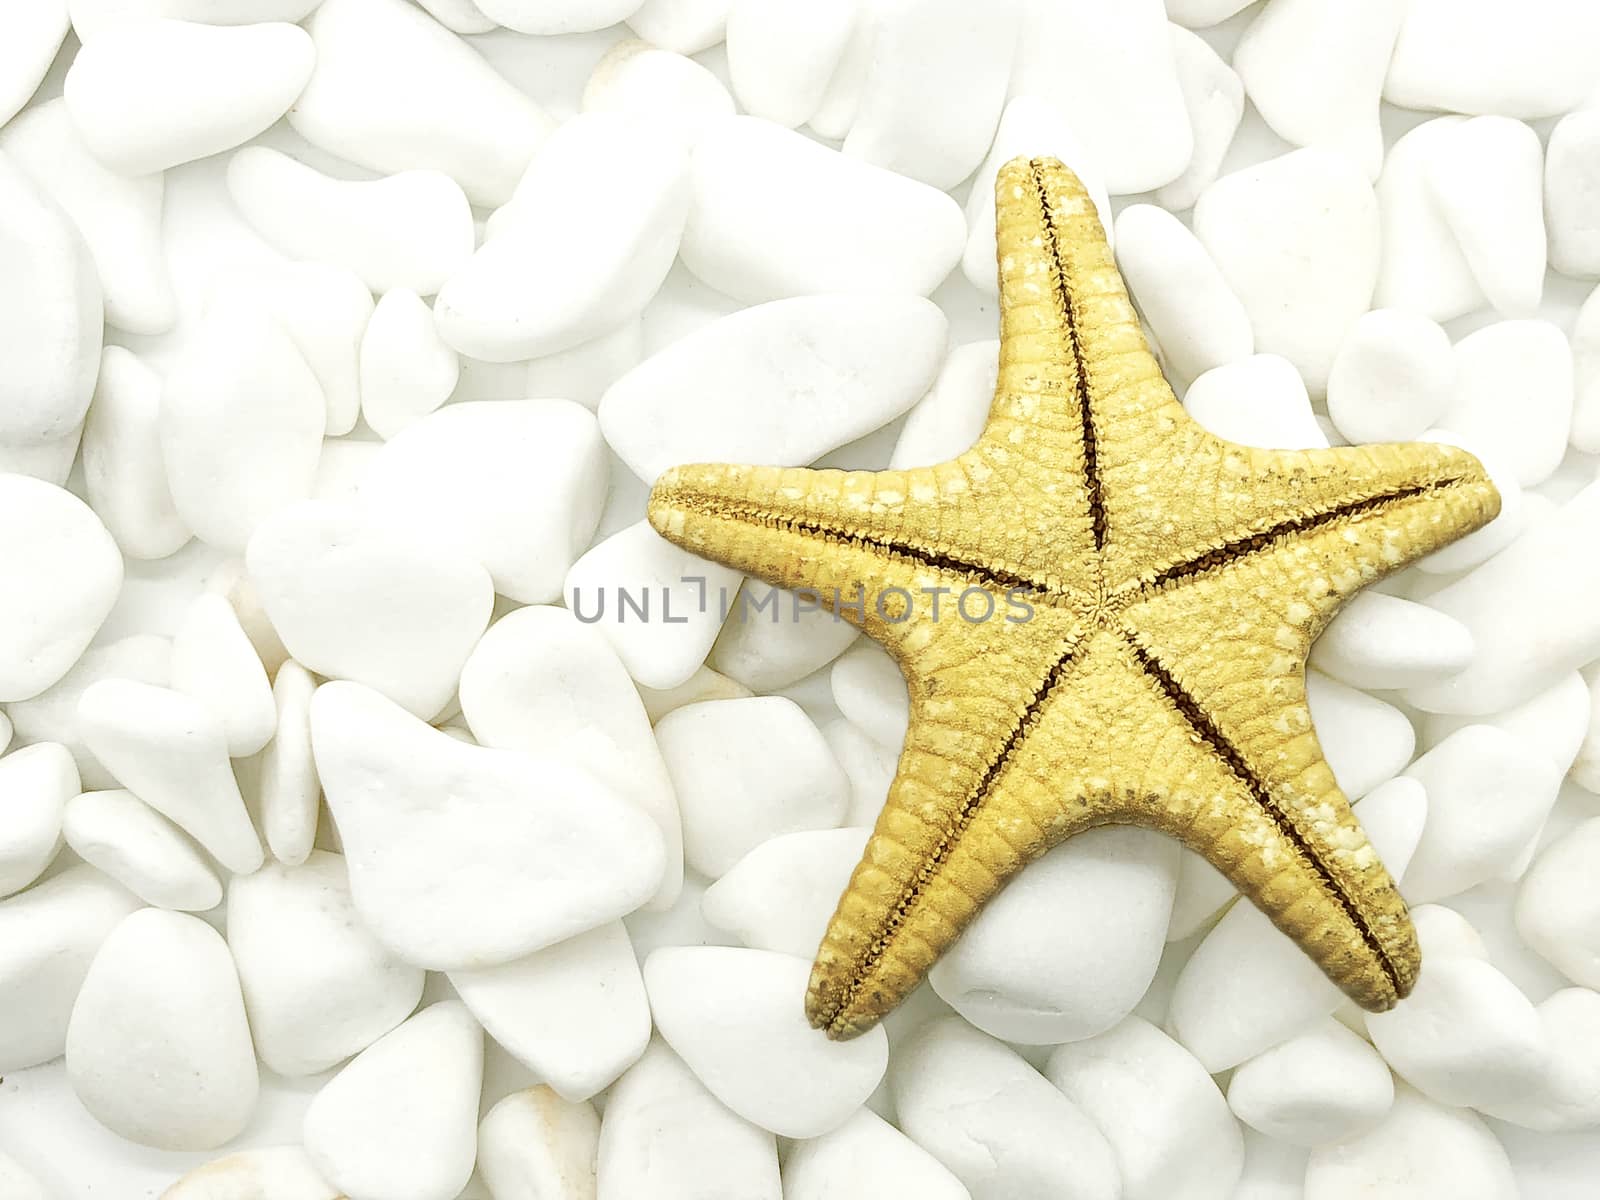 huge ocean sea starfish closeup white on stones isolated spa relax season vacation concept